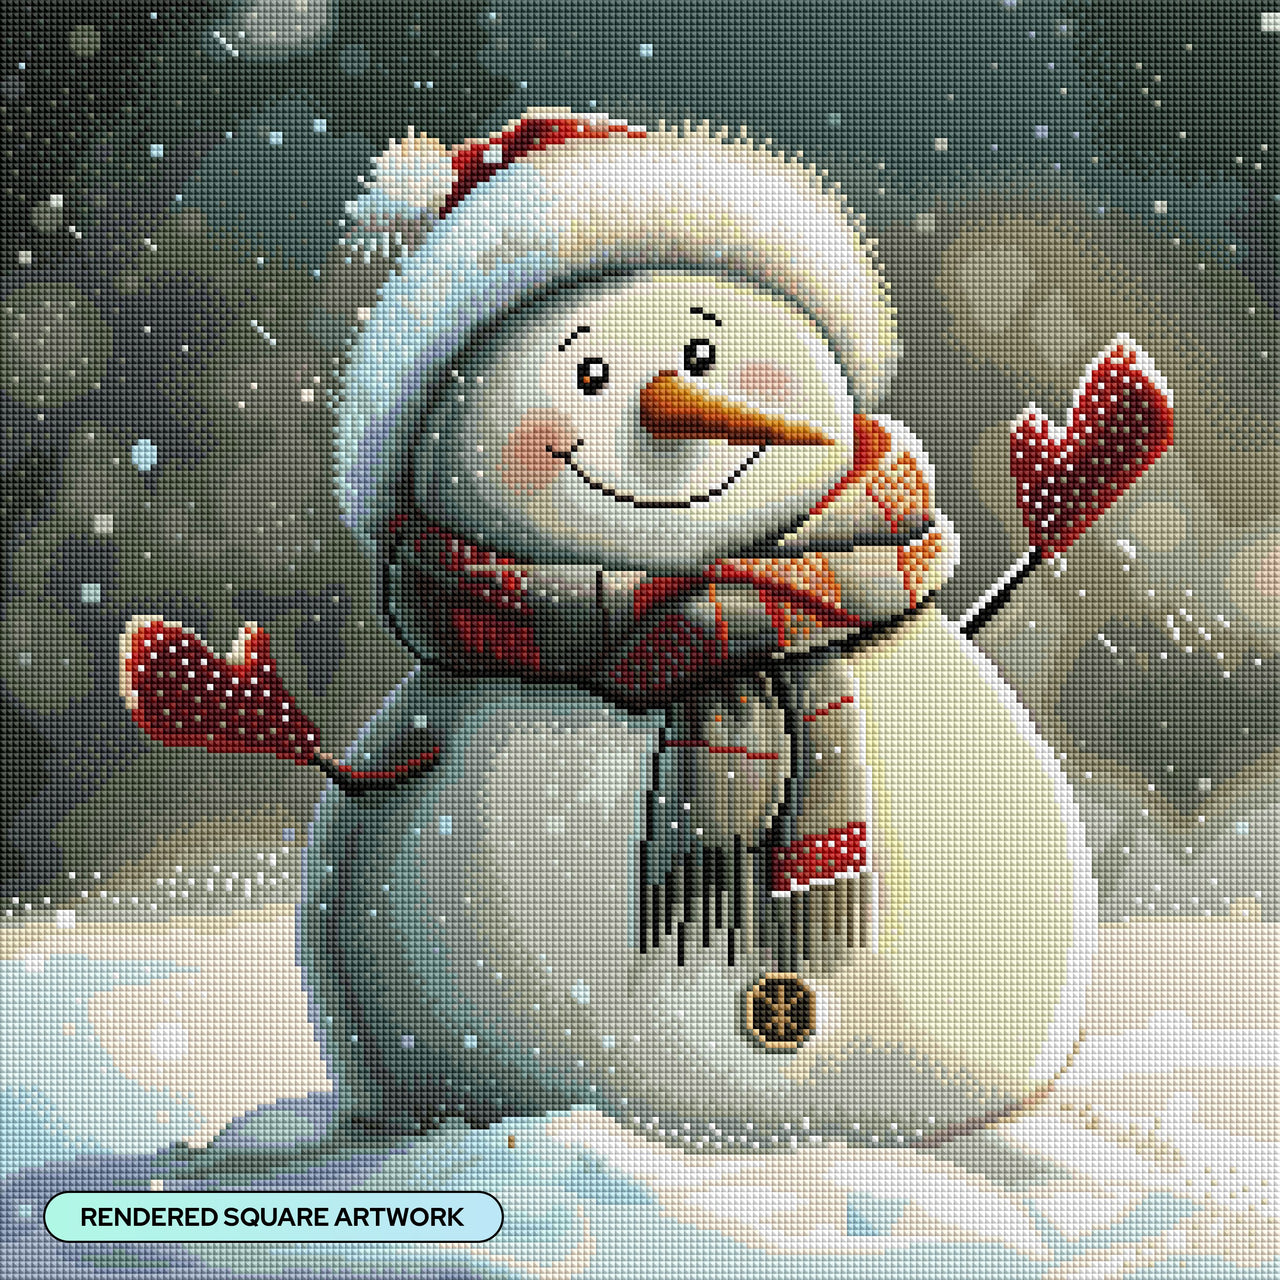 Diamond Painting Jolly Snowman 20" x 20" (50.8cm x 50.8cm) / Square with 53 Colors including 3 ABs and 1 Fairy Dust Diamonds / 41,616